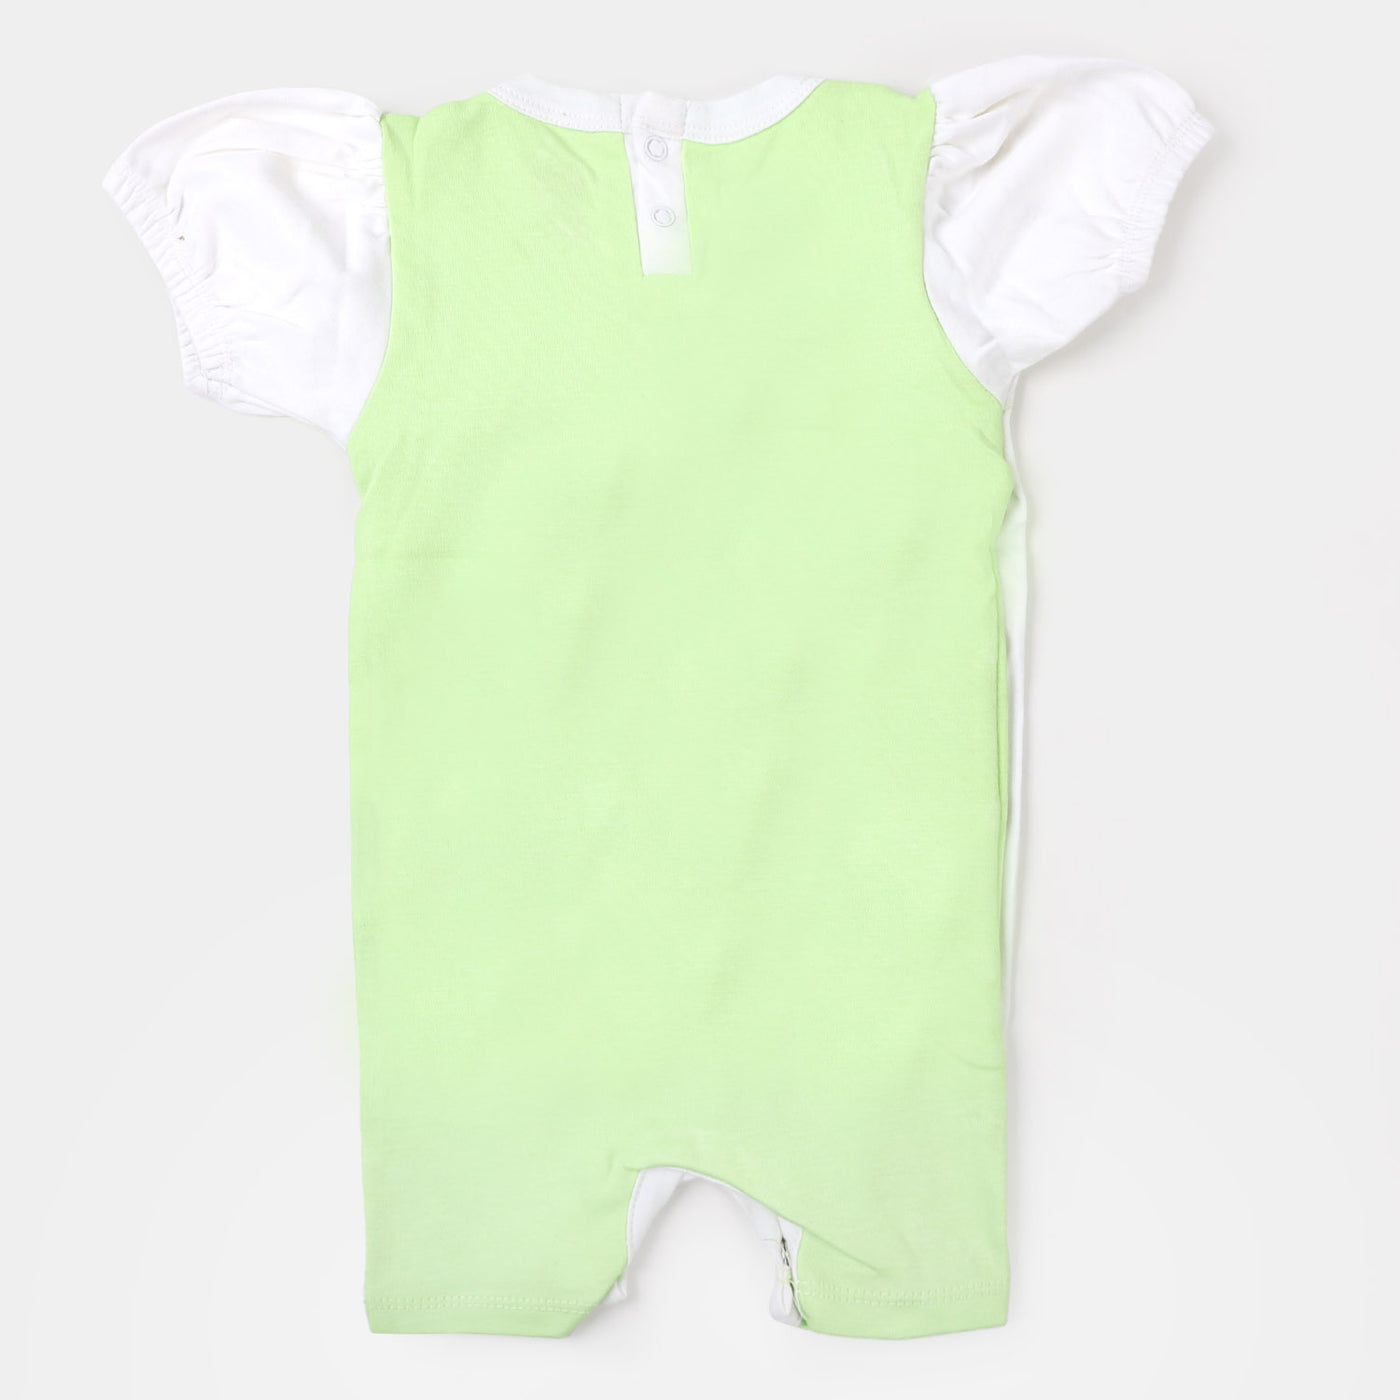 Infant Girls Knitted Rompers BE Happy - Sharp Green